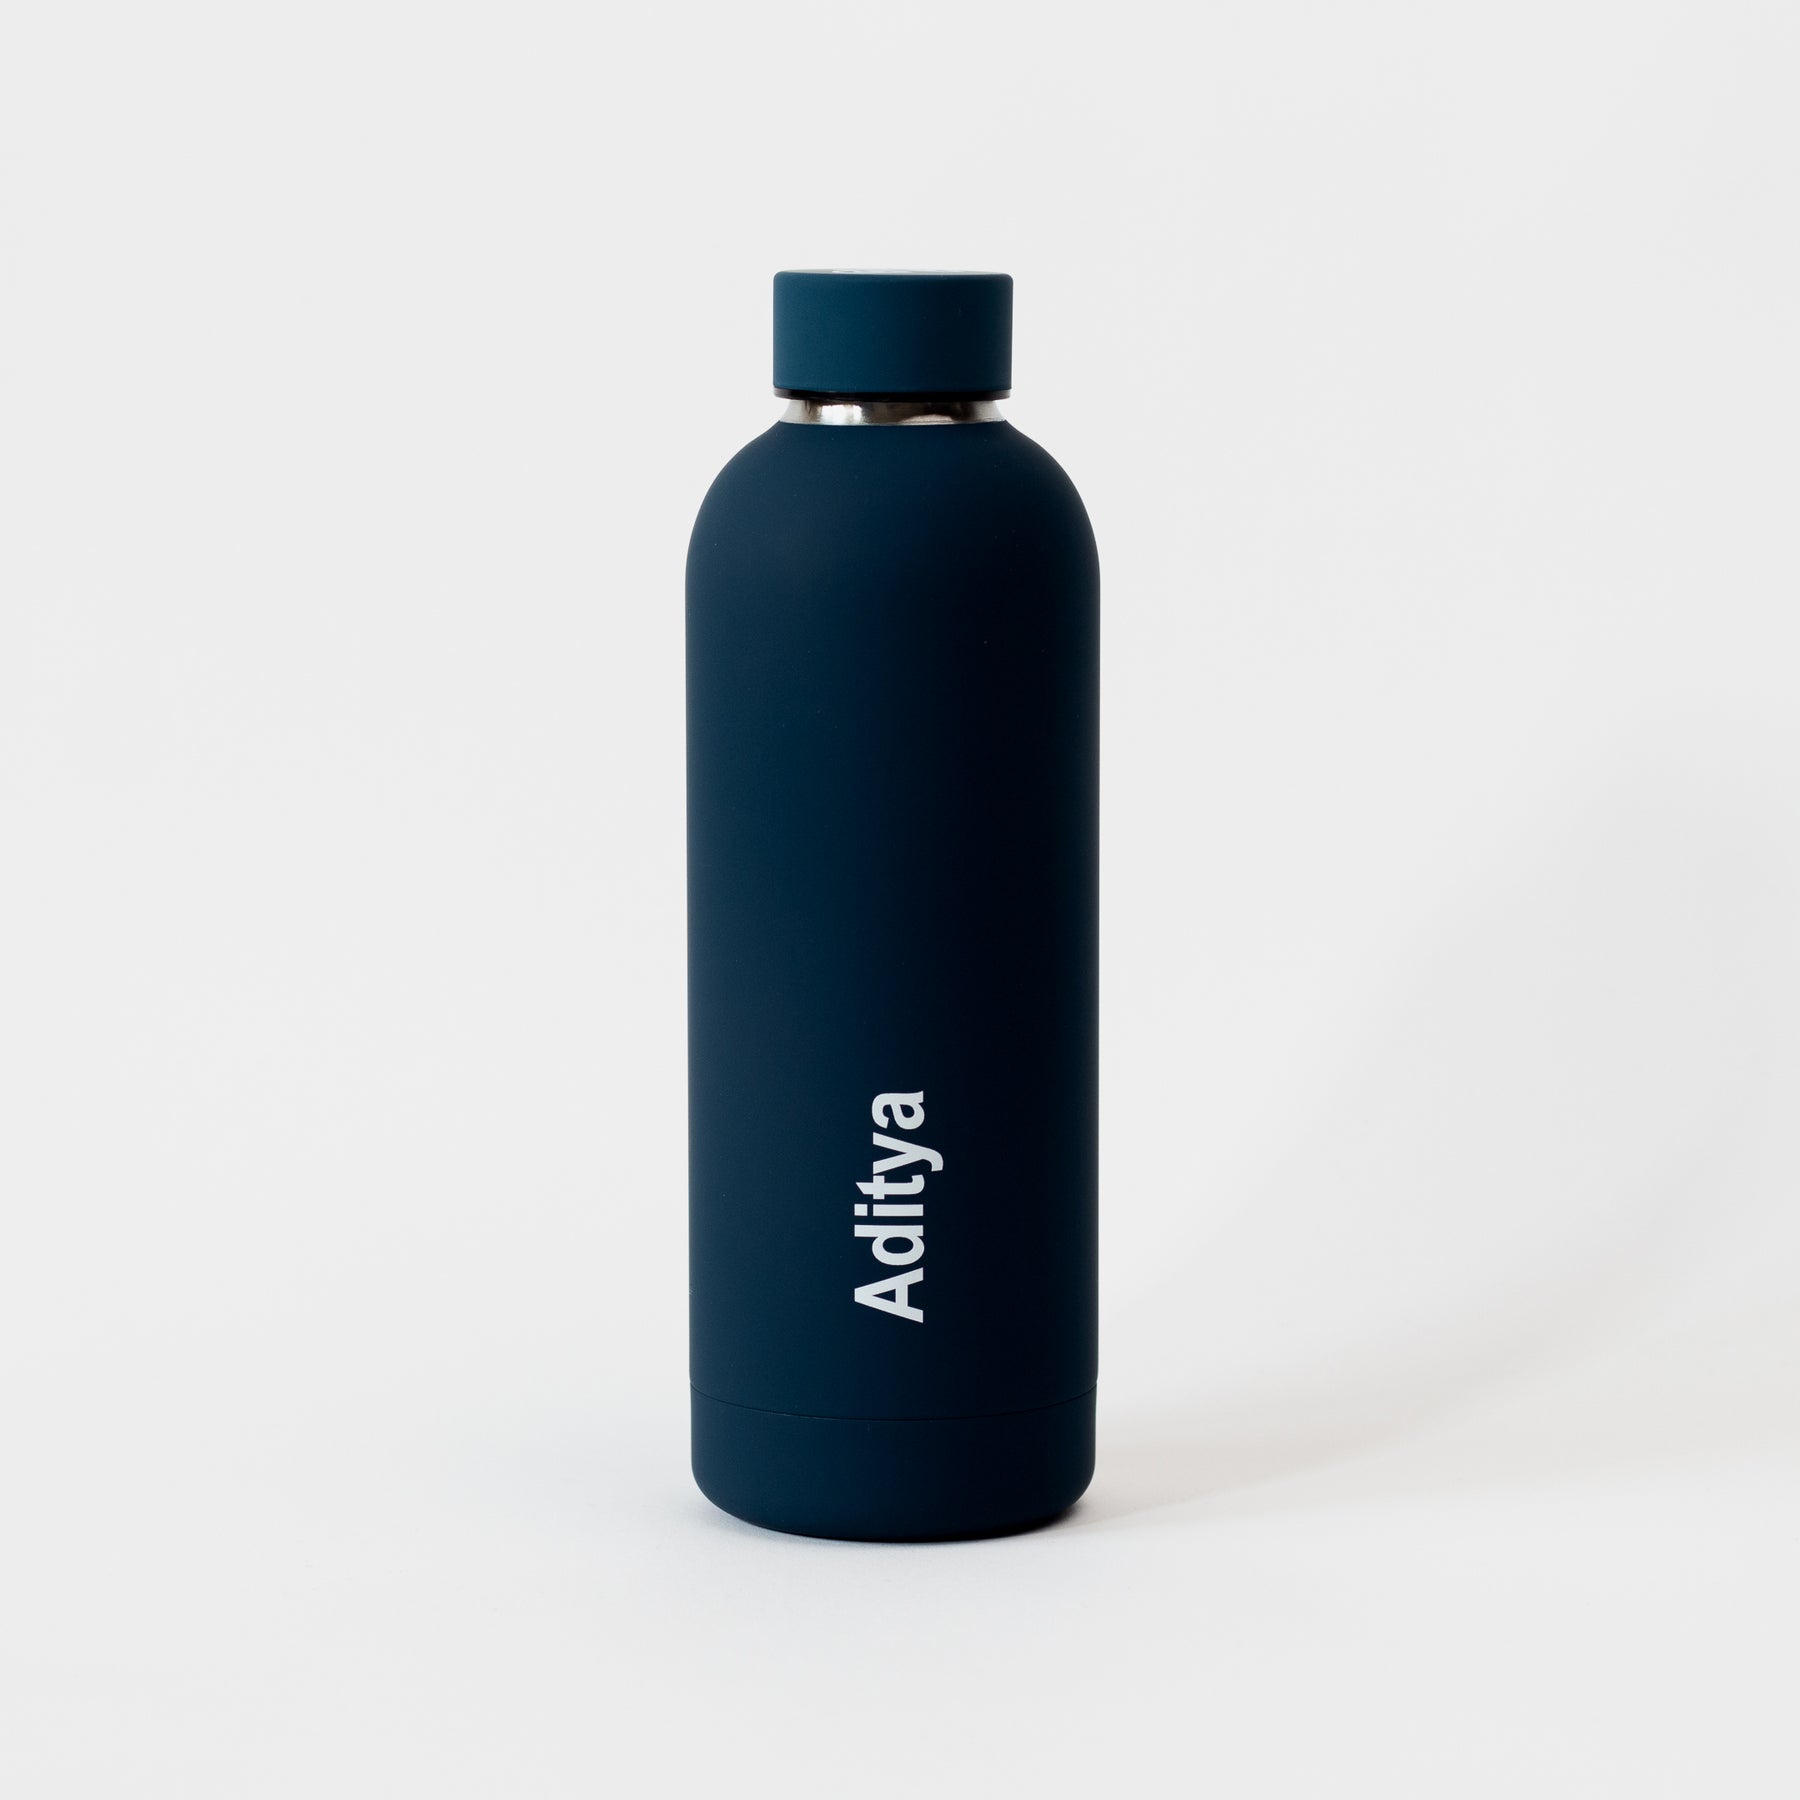 Quench - Personalised Water Bottle - Space Blue